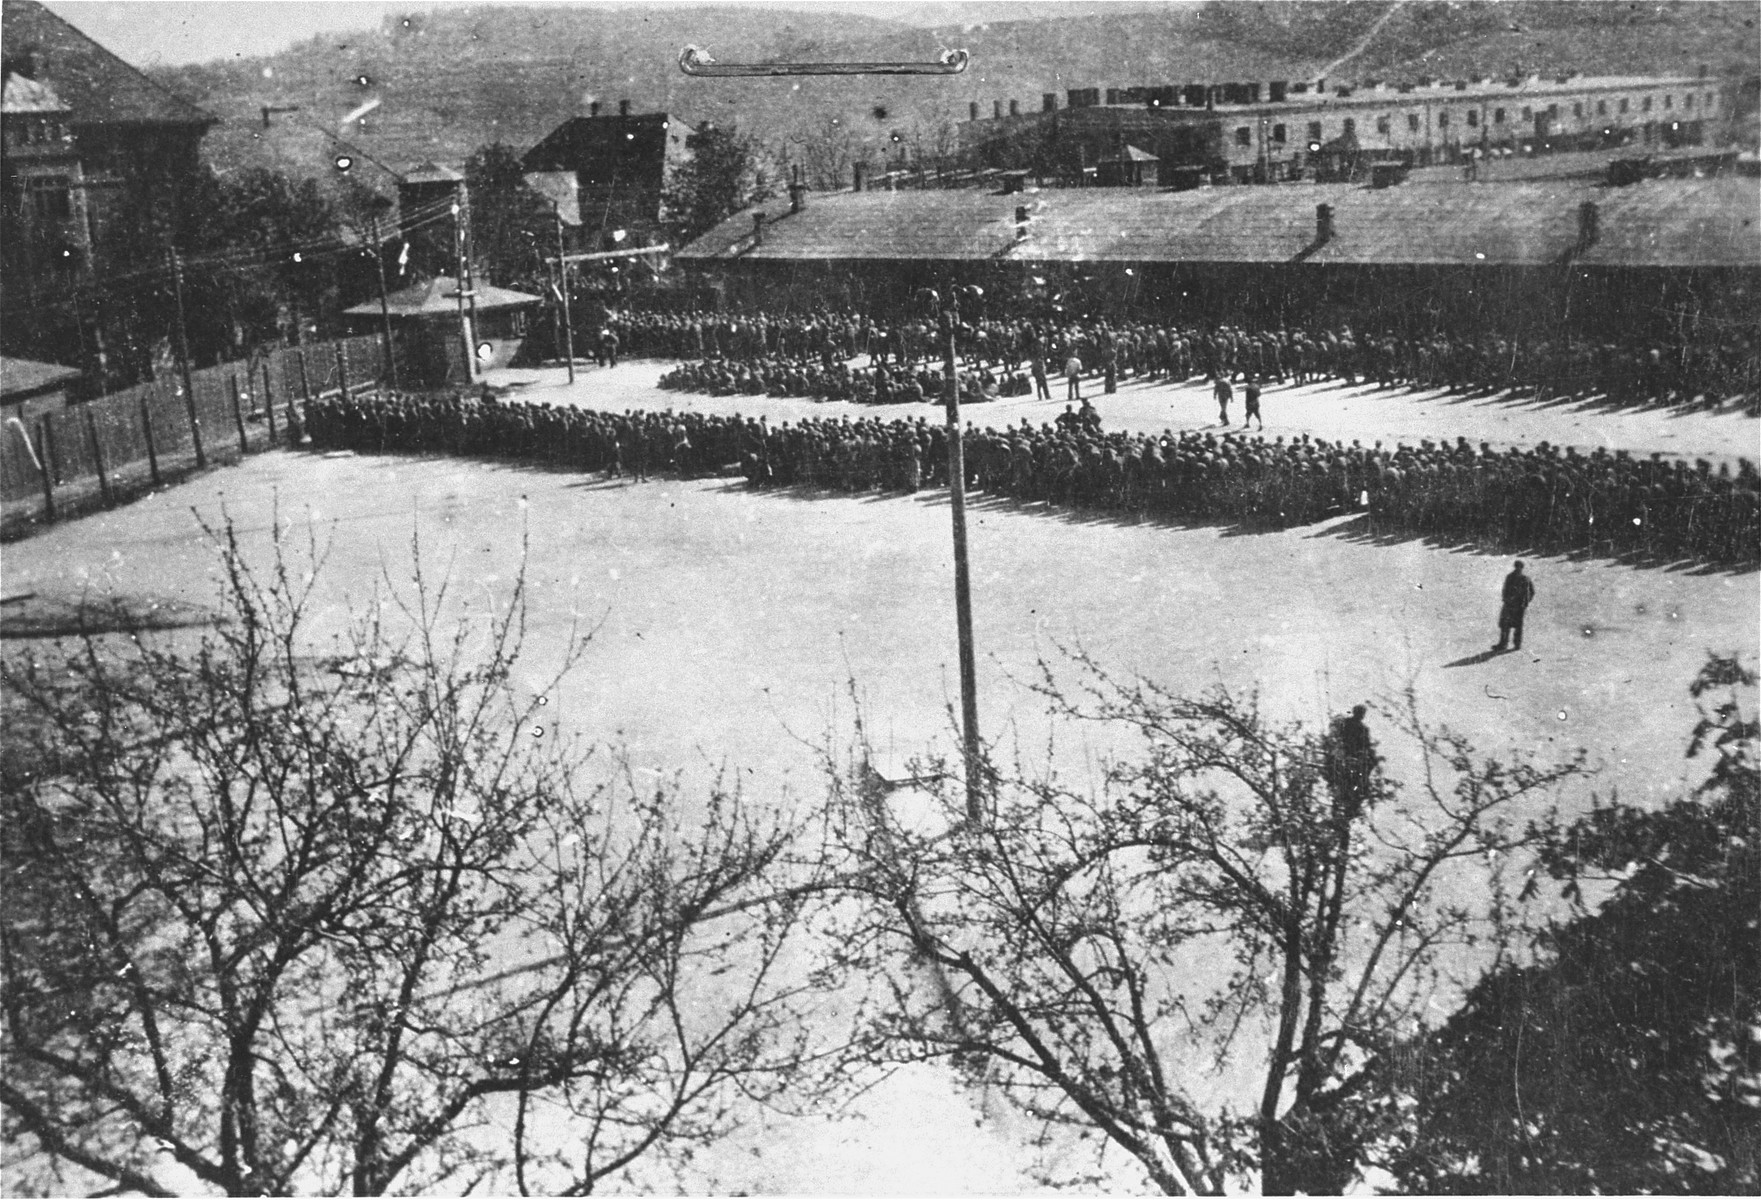 Newly arrived prisoners are assembled in the Appellplatz (roll call area) at Camp Melk, 1944-1945